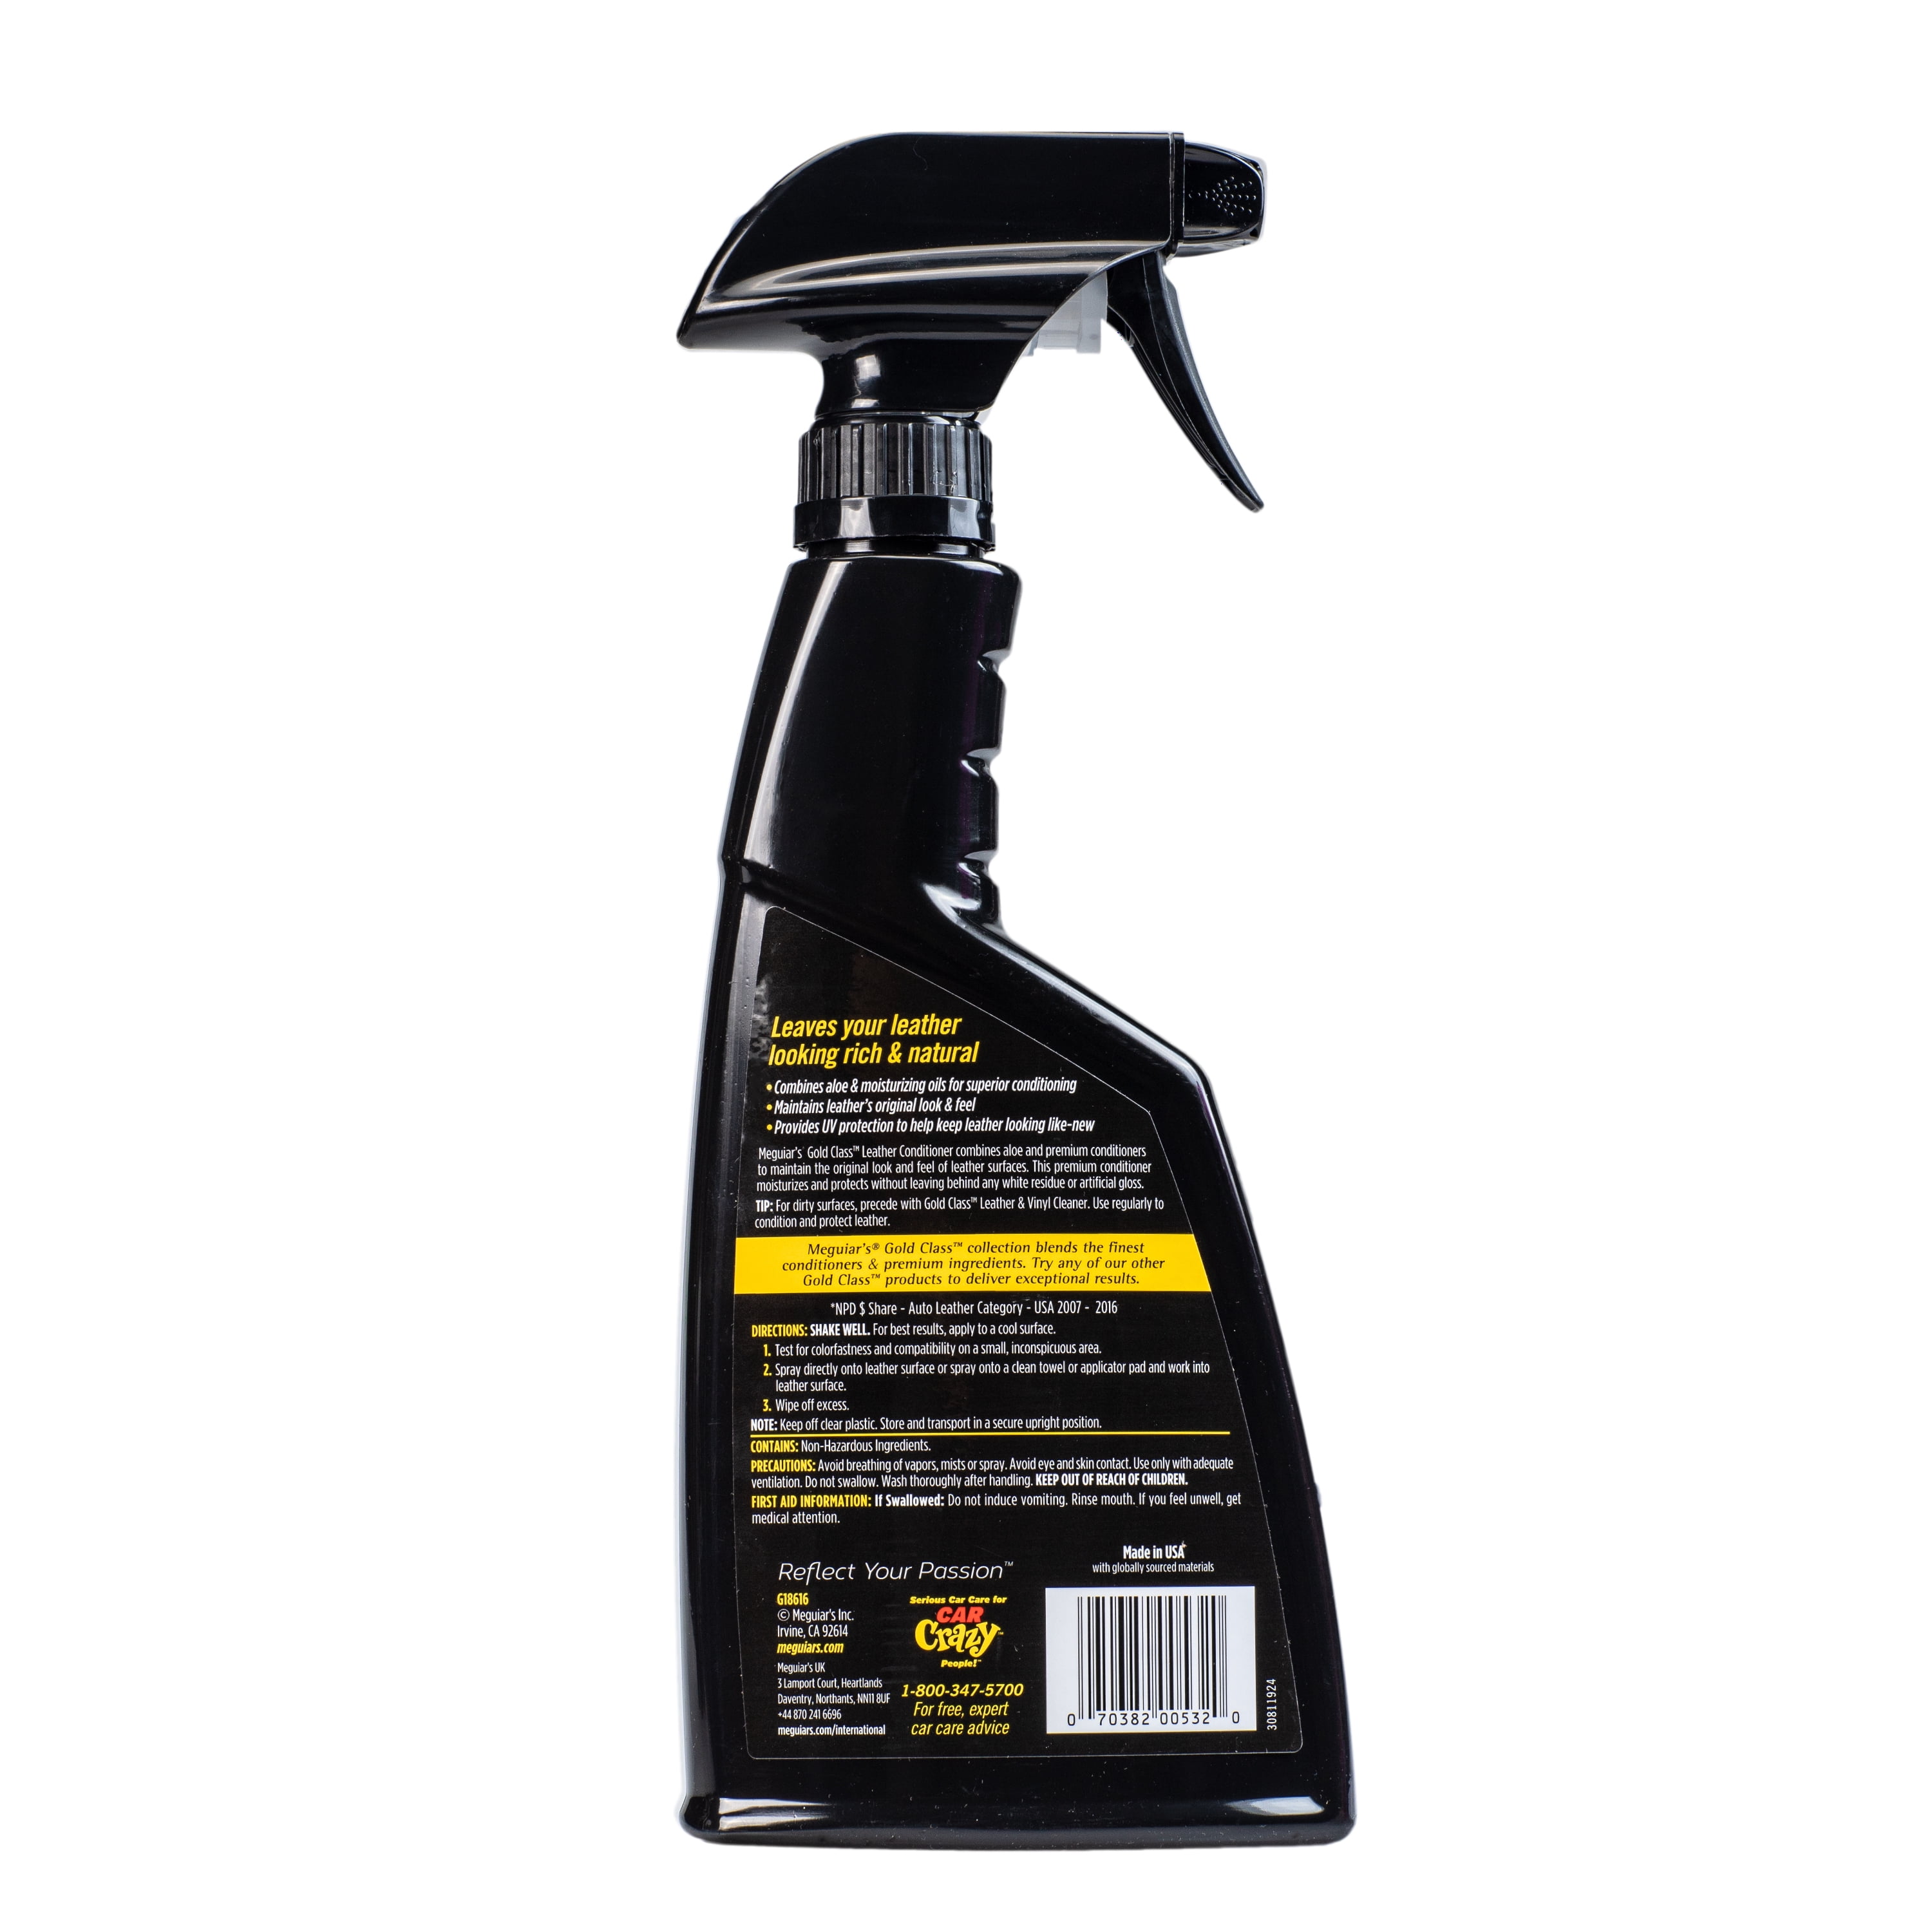 Meguiars G7214 Gold Class Leather Cleaner & Conditioner - 14 oz